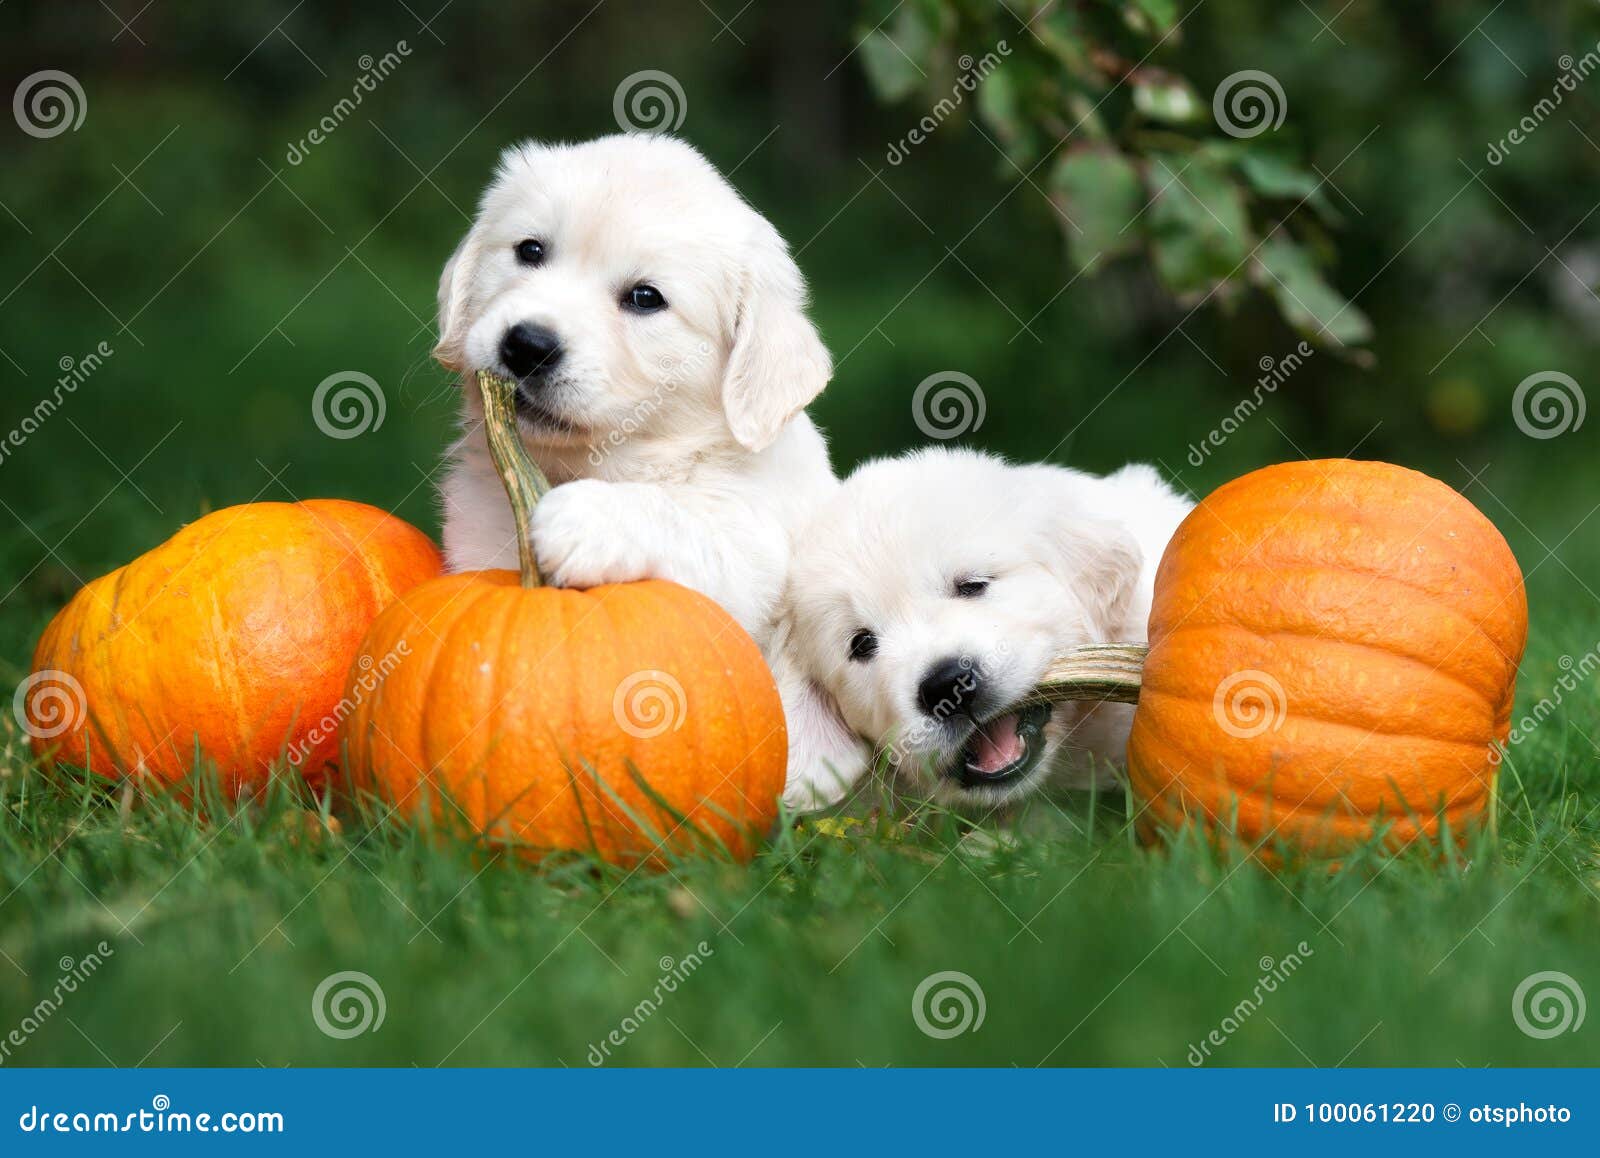 Two Adorable Golden Retriever Puppies Playing With Pumpkins Stock Photo Image Of Food Breed 100061220